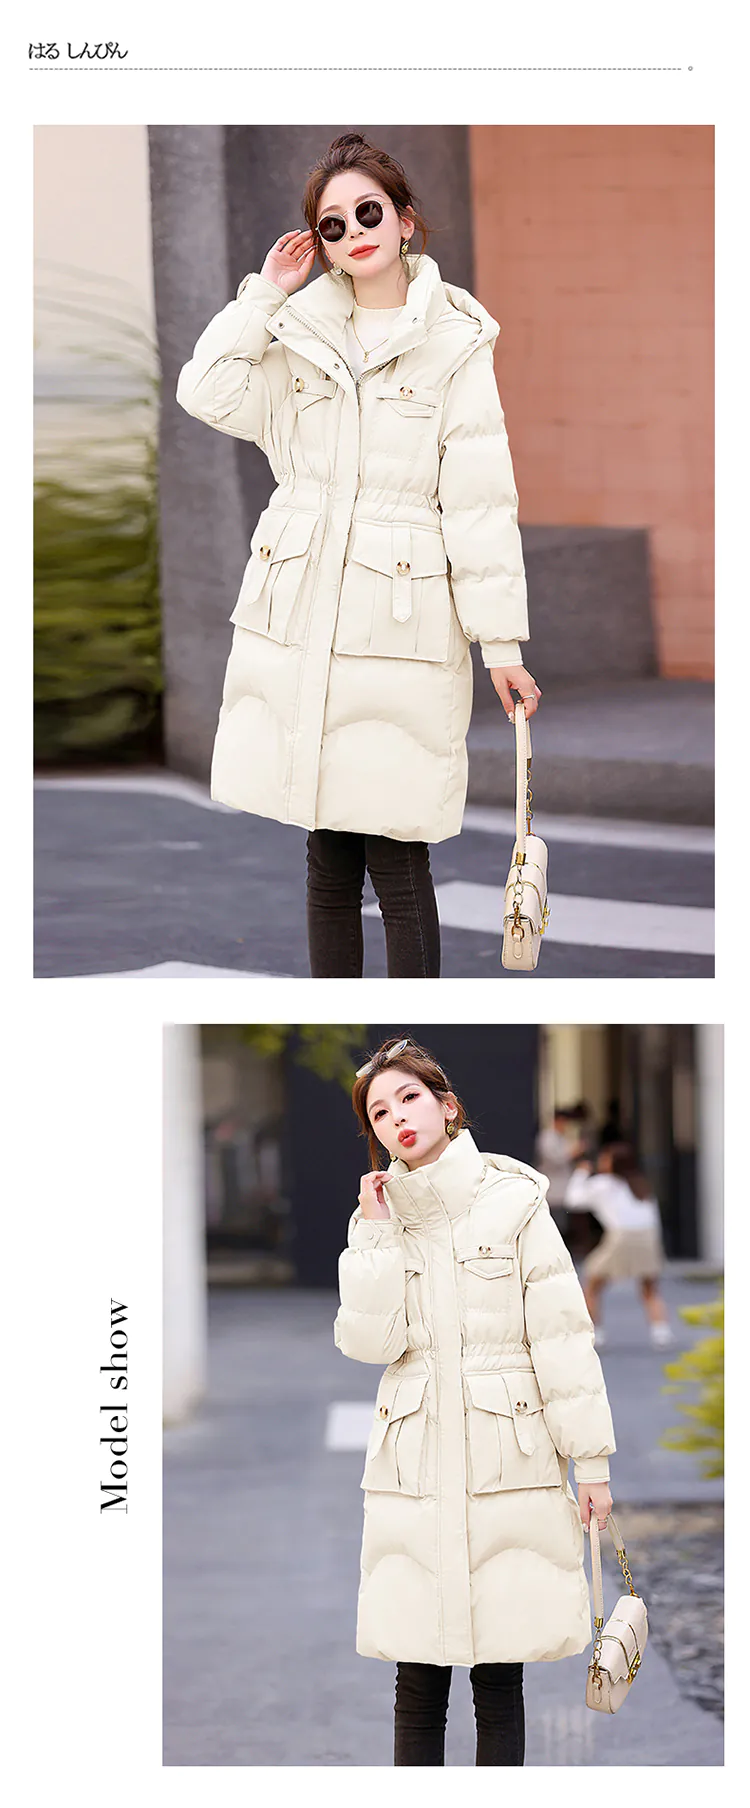 Fashion-Slim-Fit-Hooded-Zipper-Thick-Winter-Casual-Down-Coat17